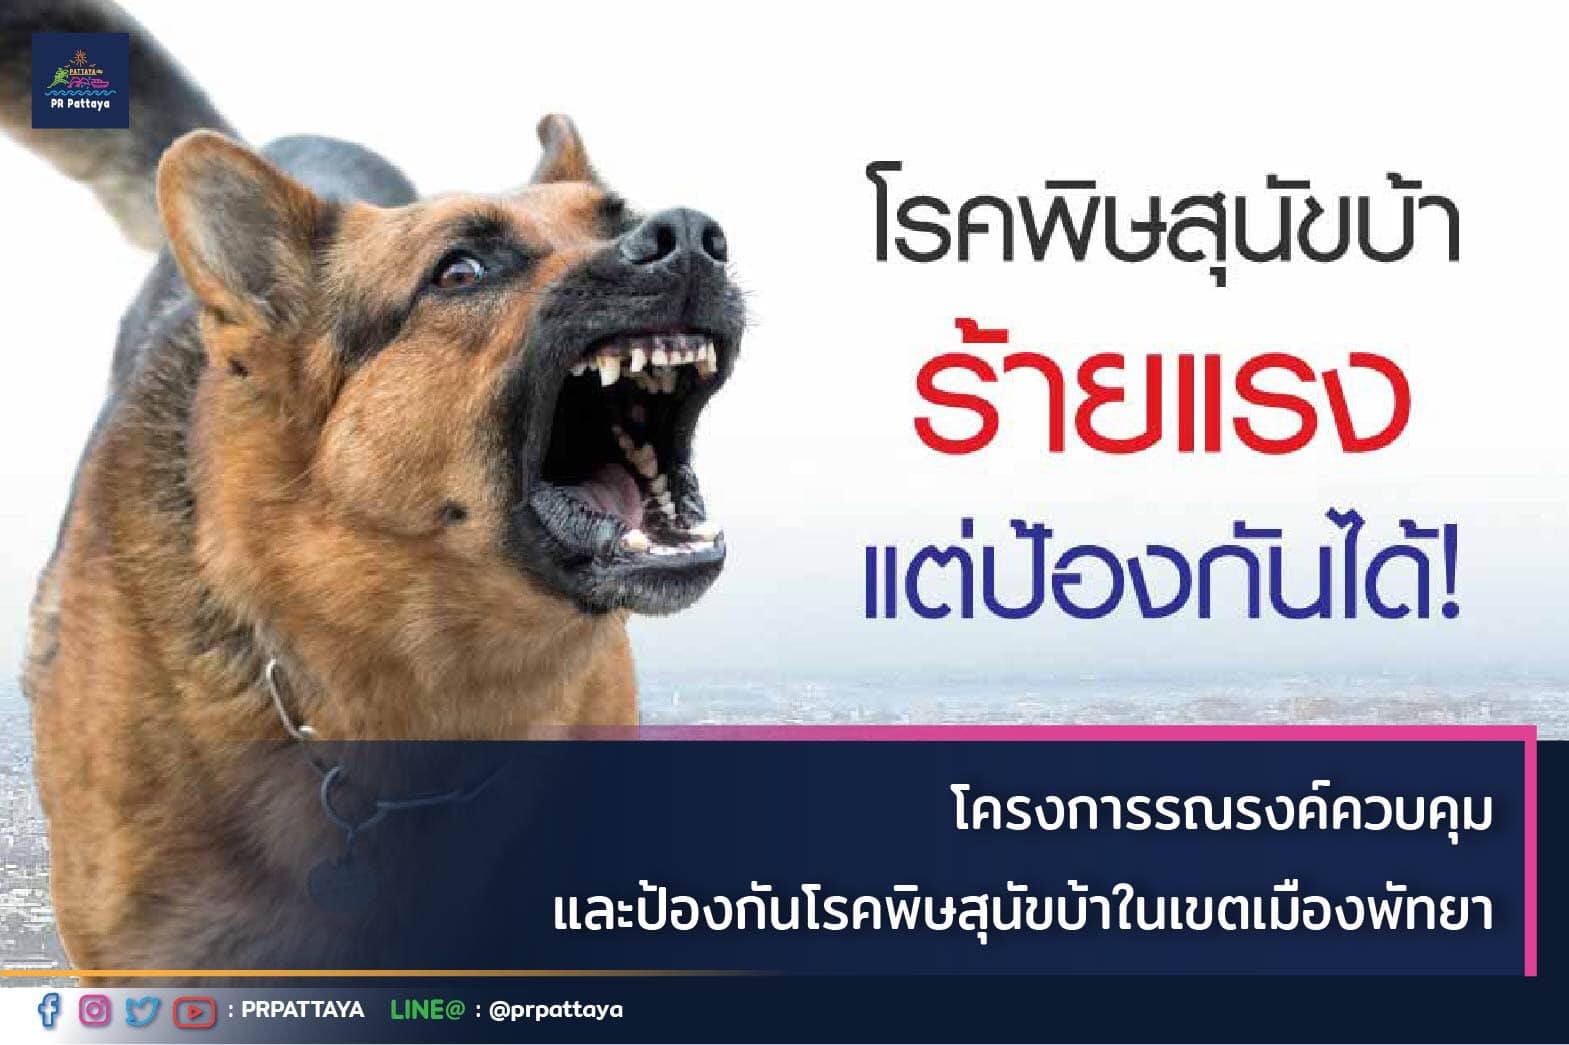 Pattaya city urges citizens to get pets vaccinated and sterilized, ranging from April 20th to April 27th